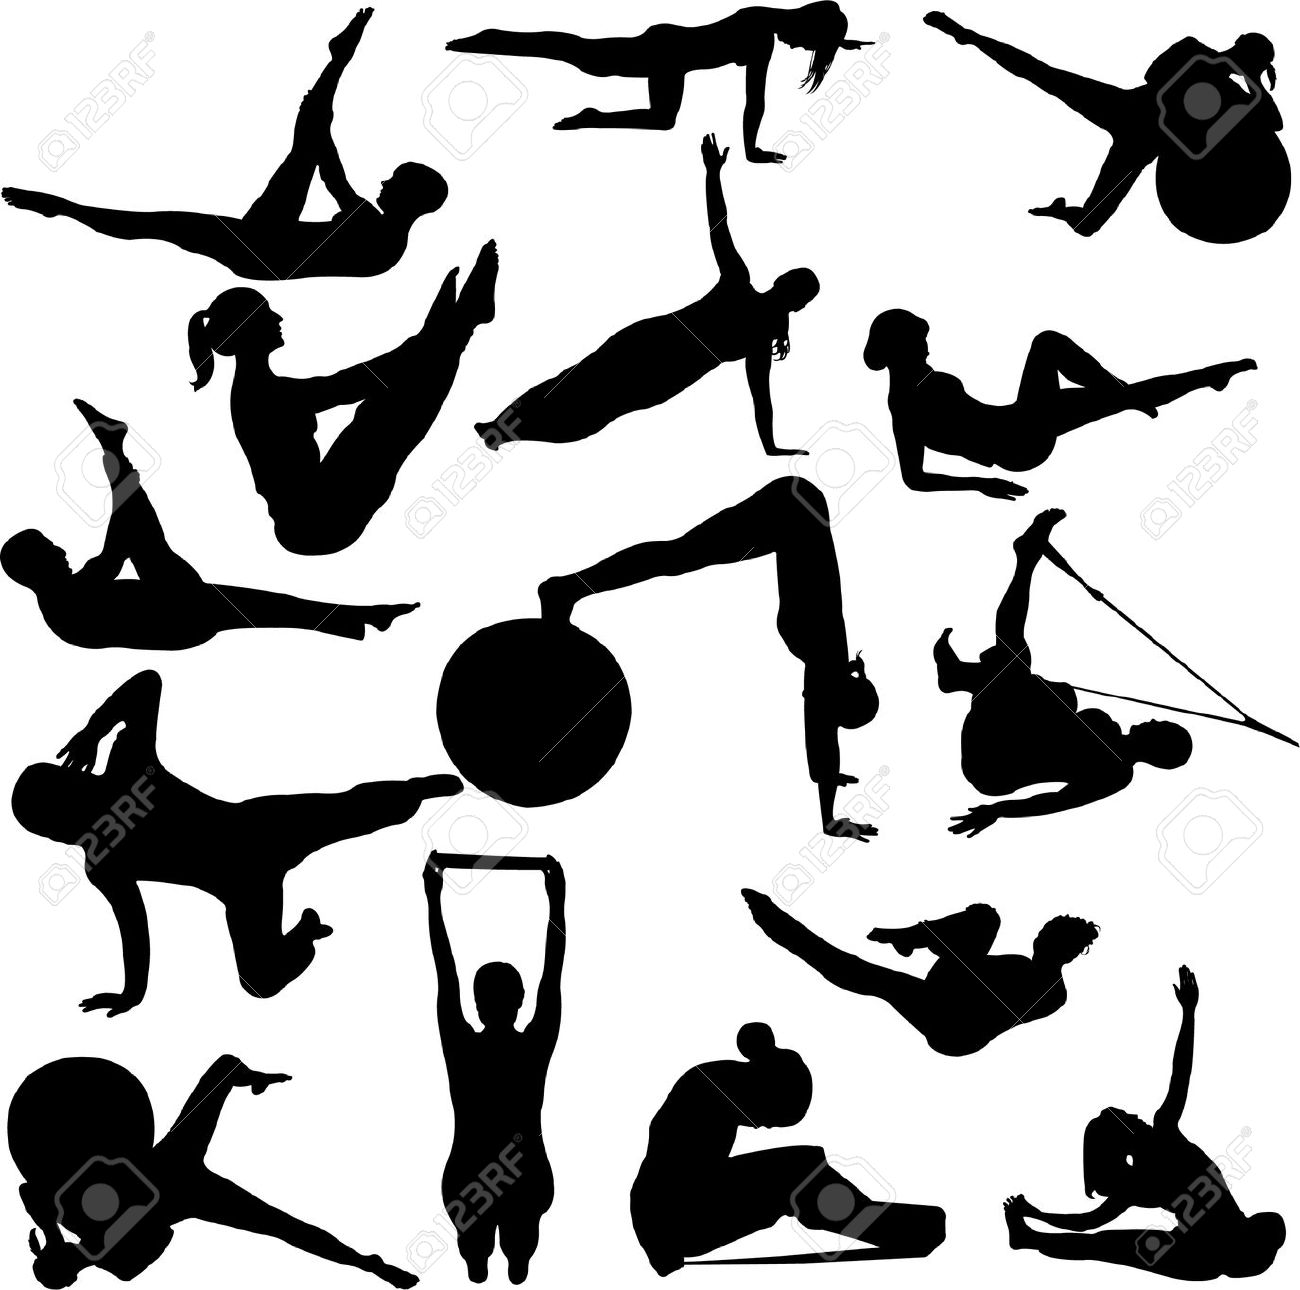 silhouette illustration of a woman figure doing physical fitness